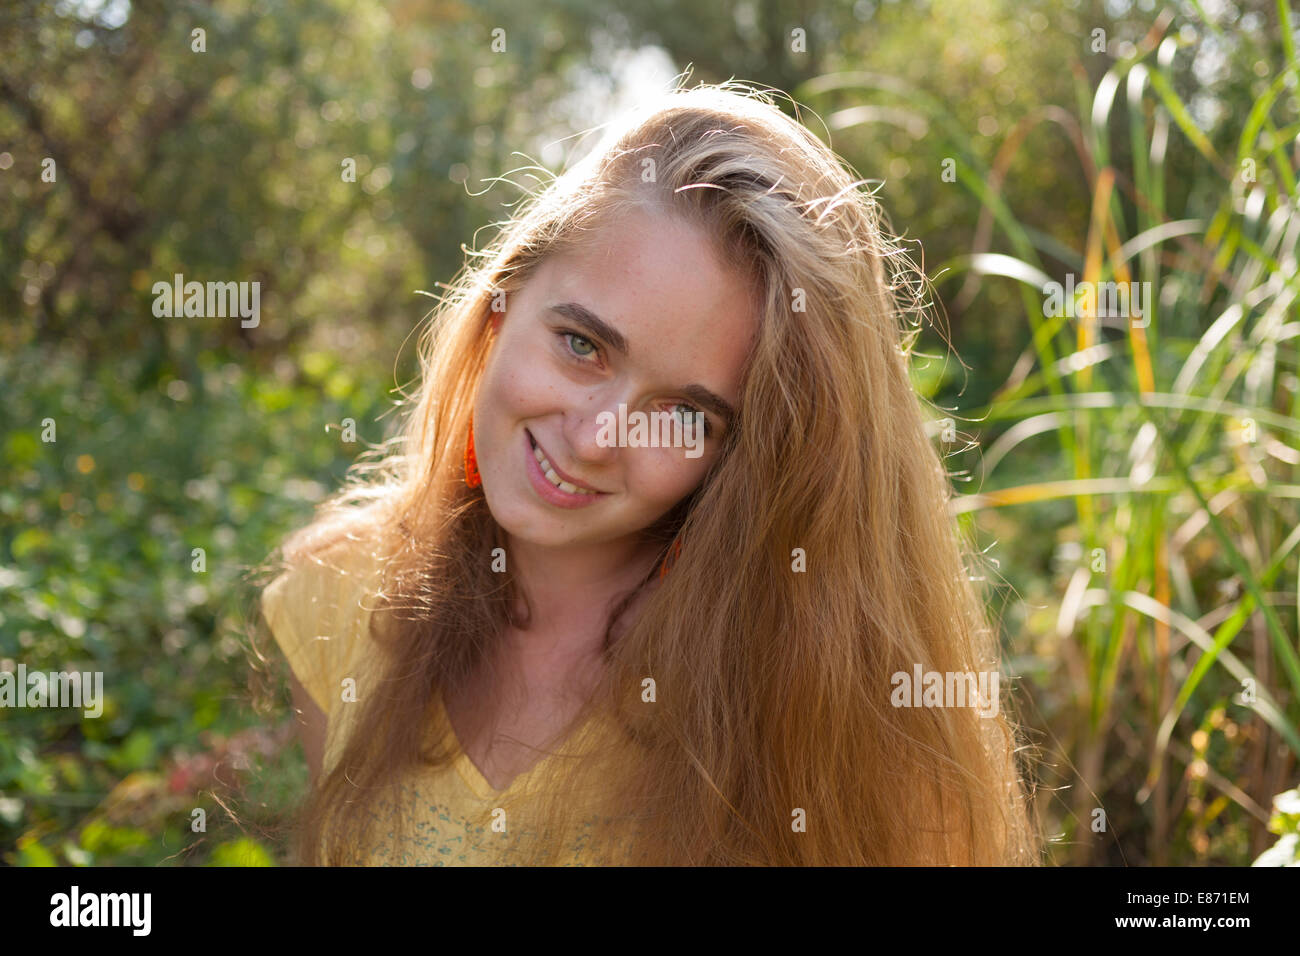 Young female outside enjoying warm wether. Happy woman outdoors. Stock Photo